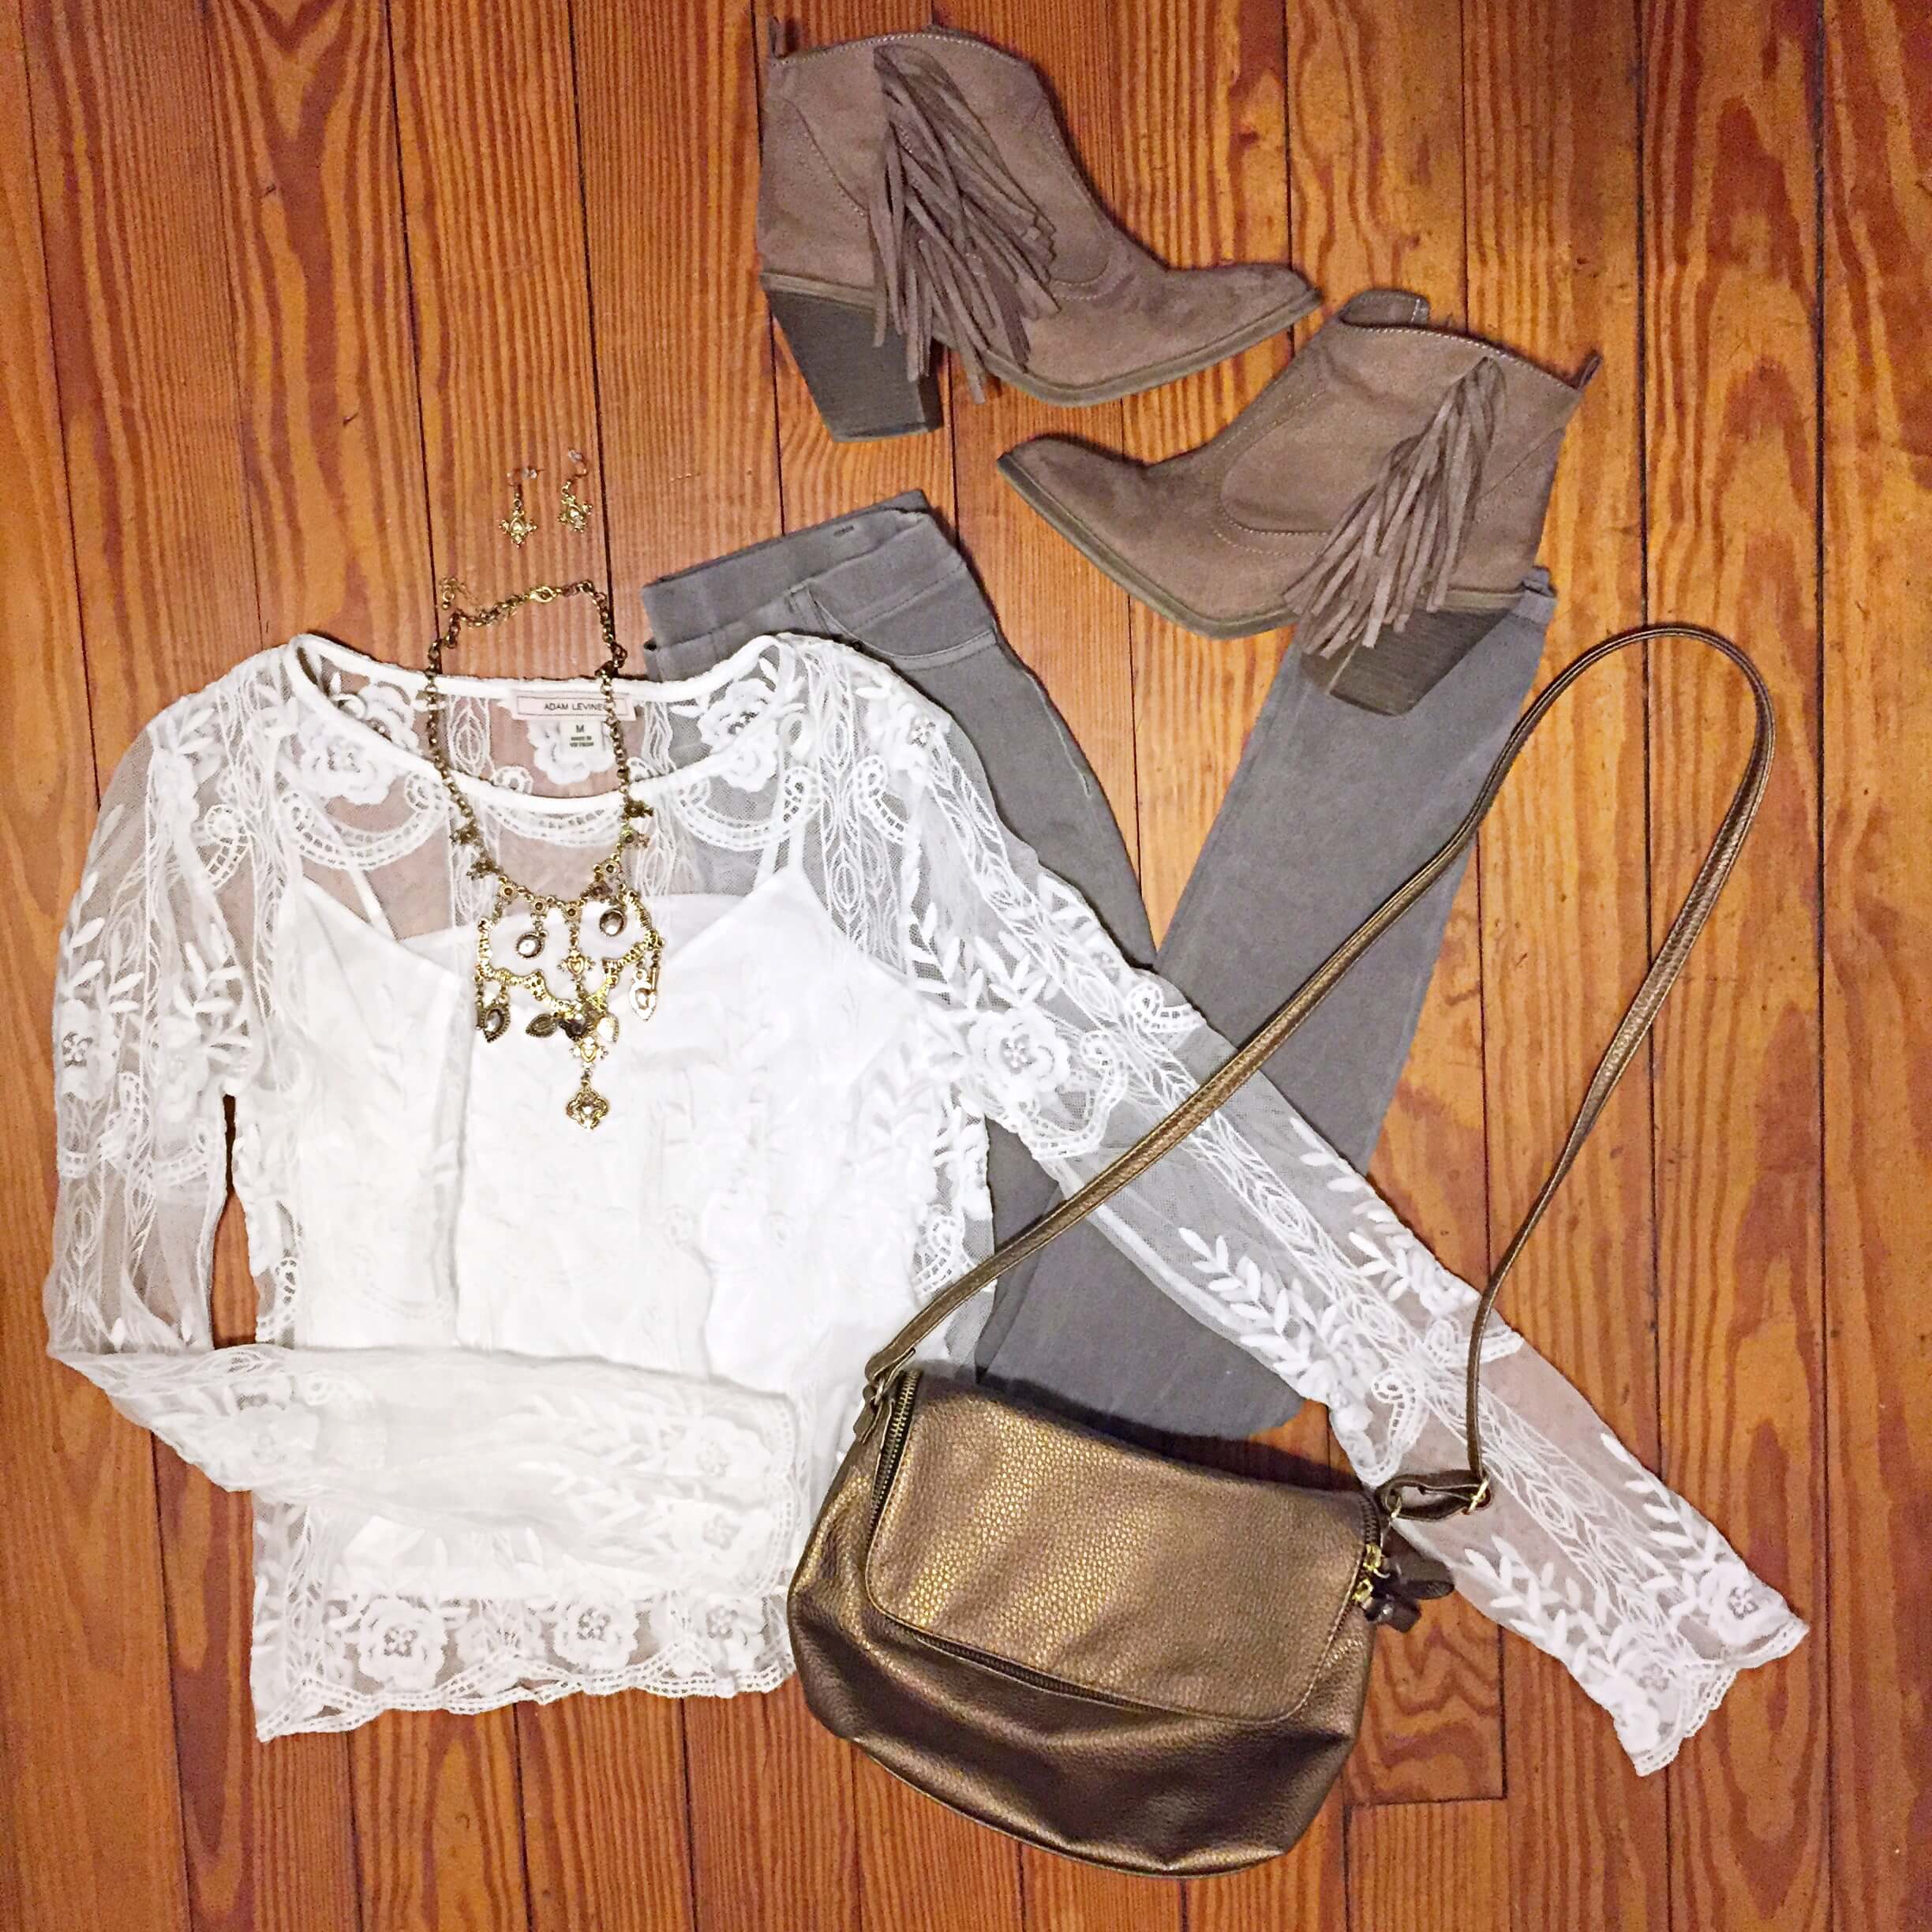 White lace shirt fall 2019 outfits